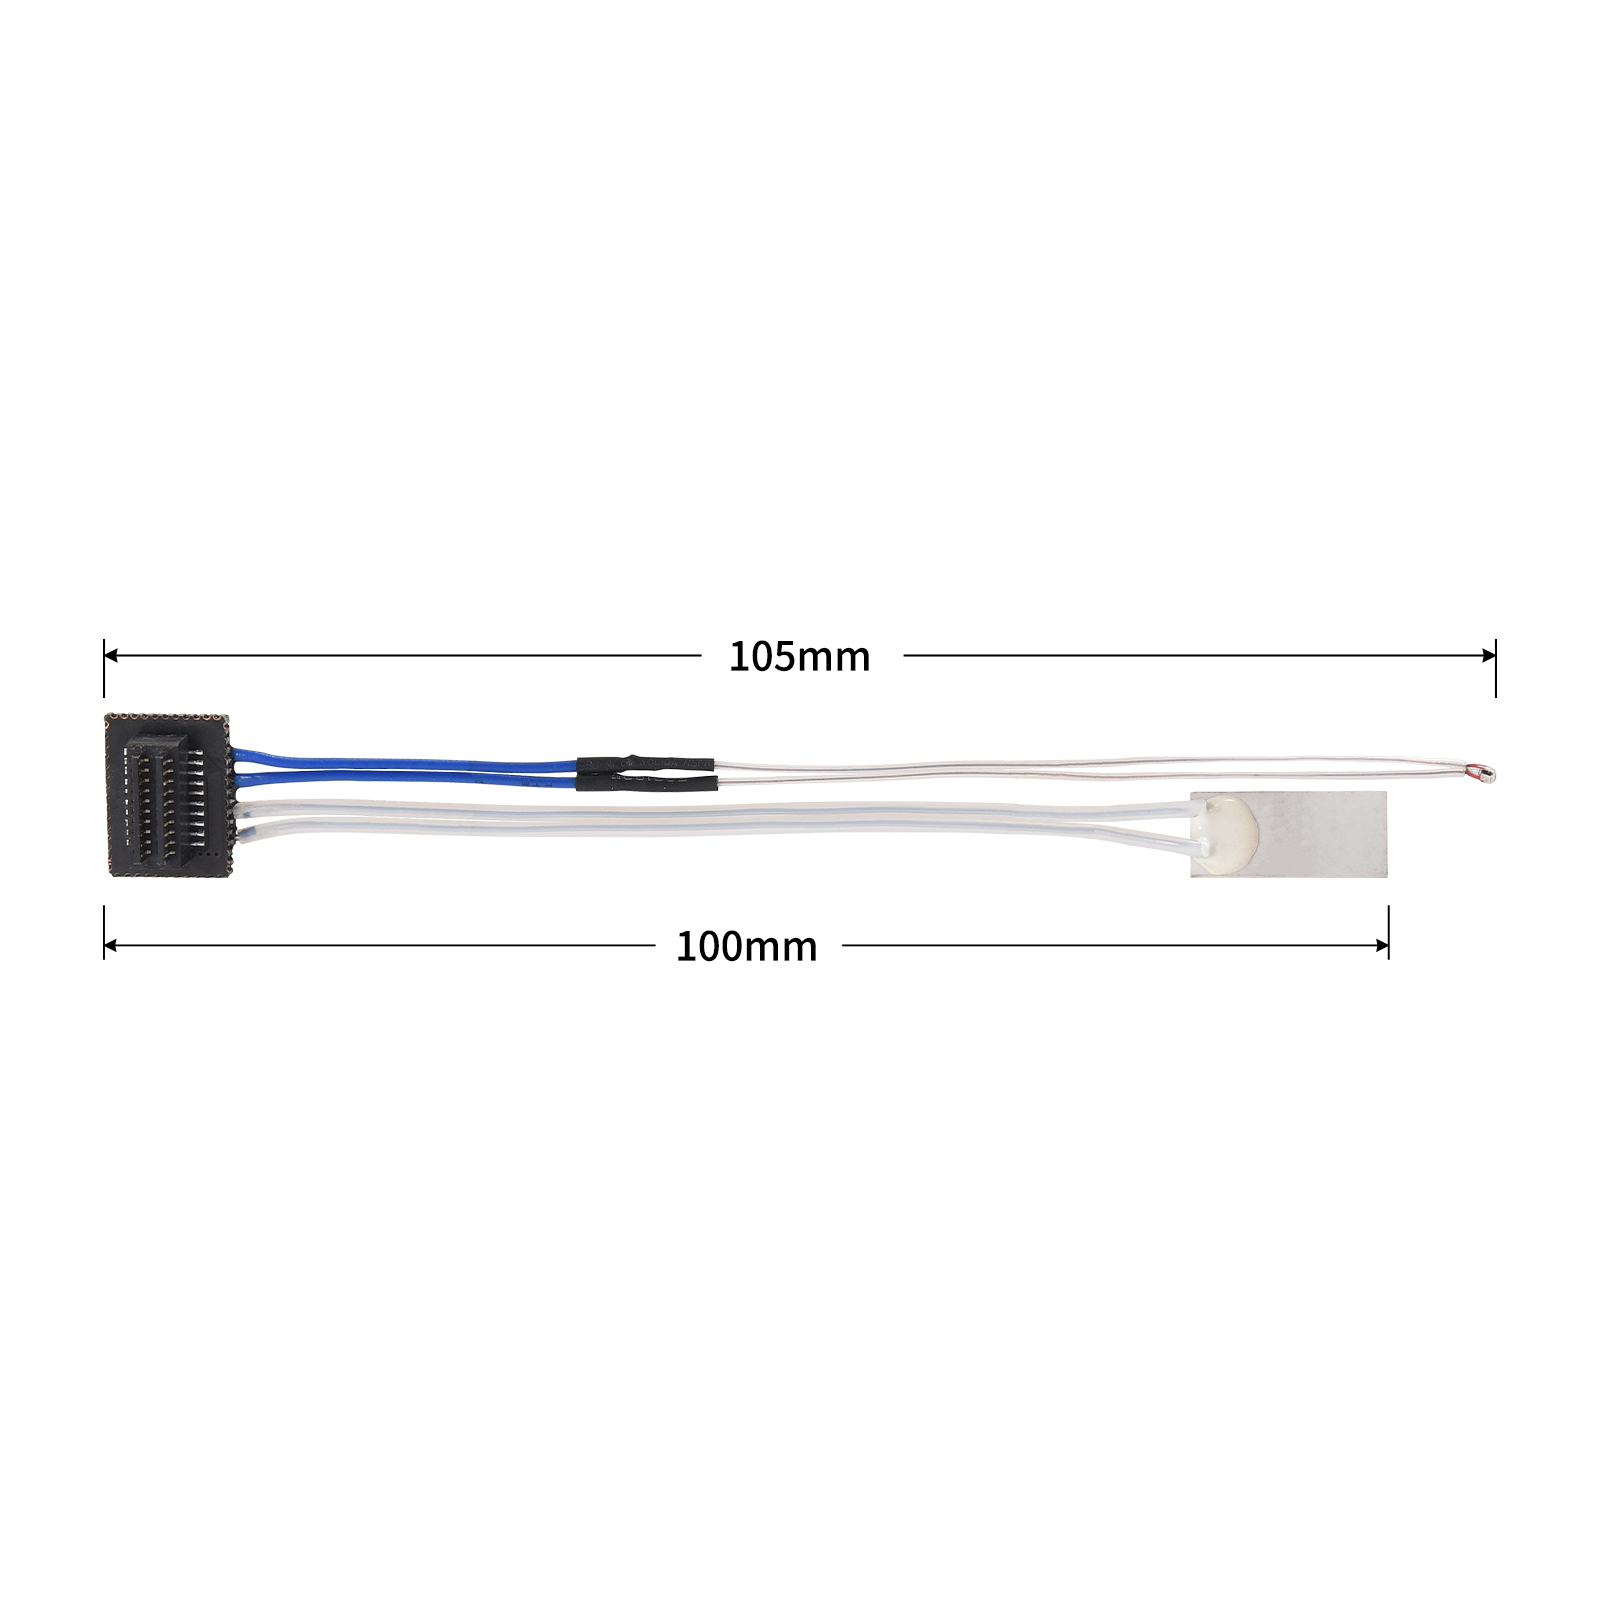 Ceramic Heater Thermistor 48W Upgrade Kit 300℃ High Temperature Sensor with 2pc Fixing Clip Compatible with Bambu Lab P1P and P1S Printers